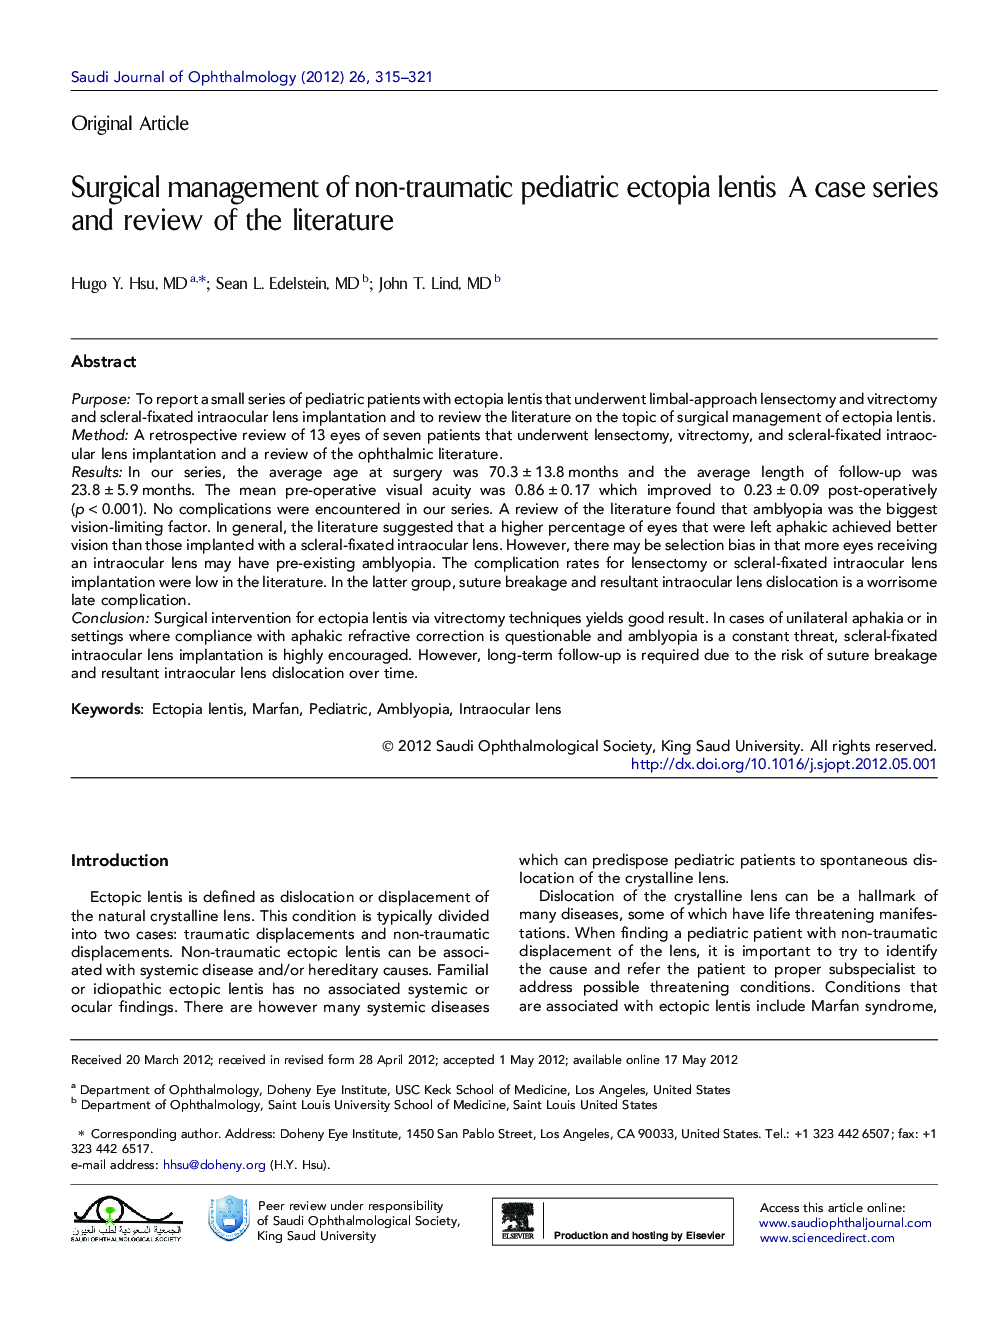 Surgical management of non-traumatic pediatric ectopia lentis: A case series and review of the literature 